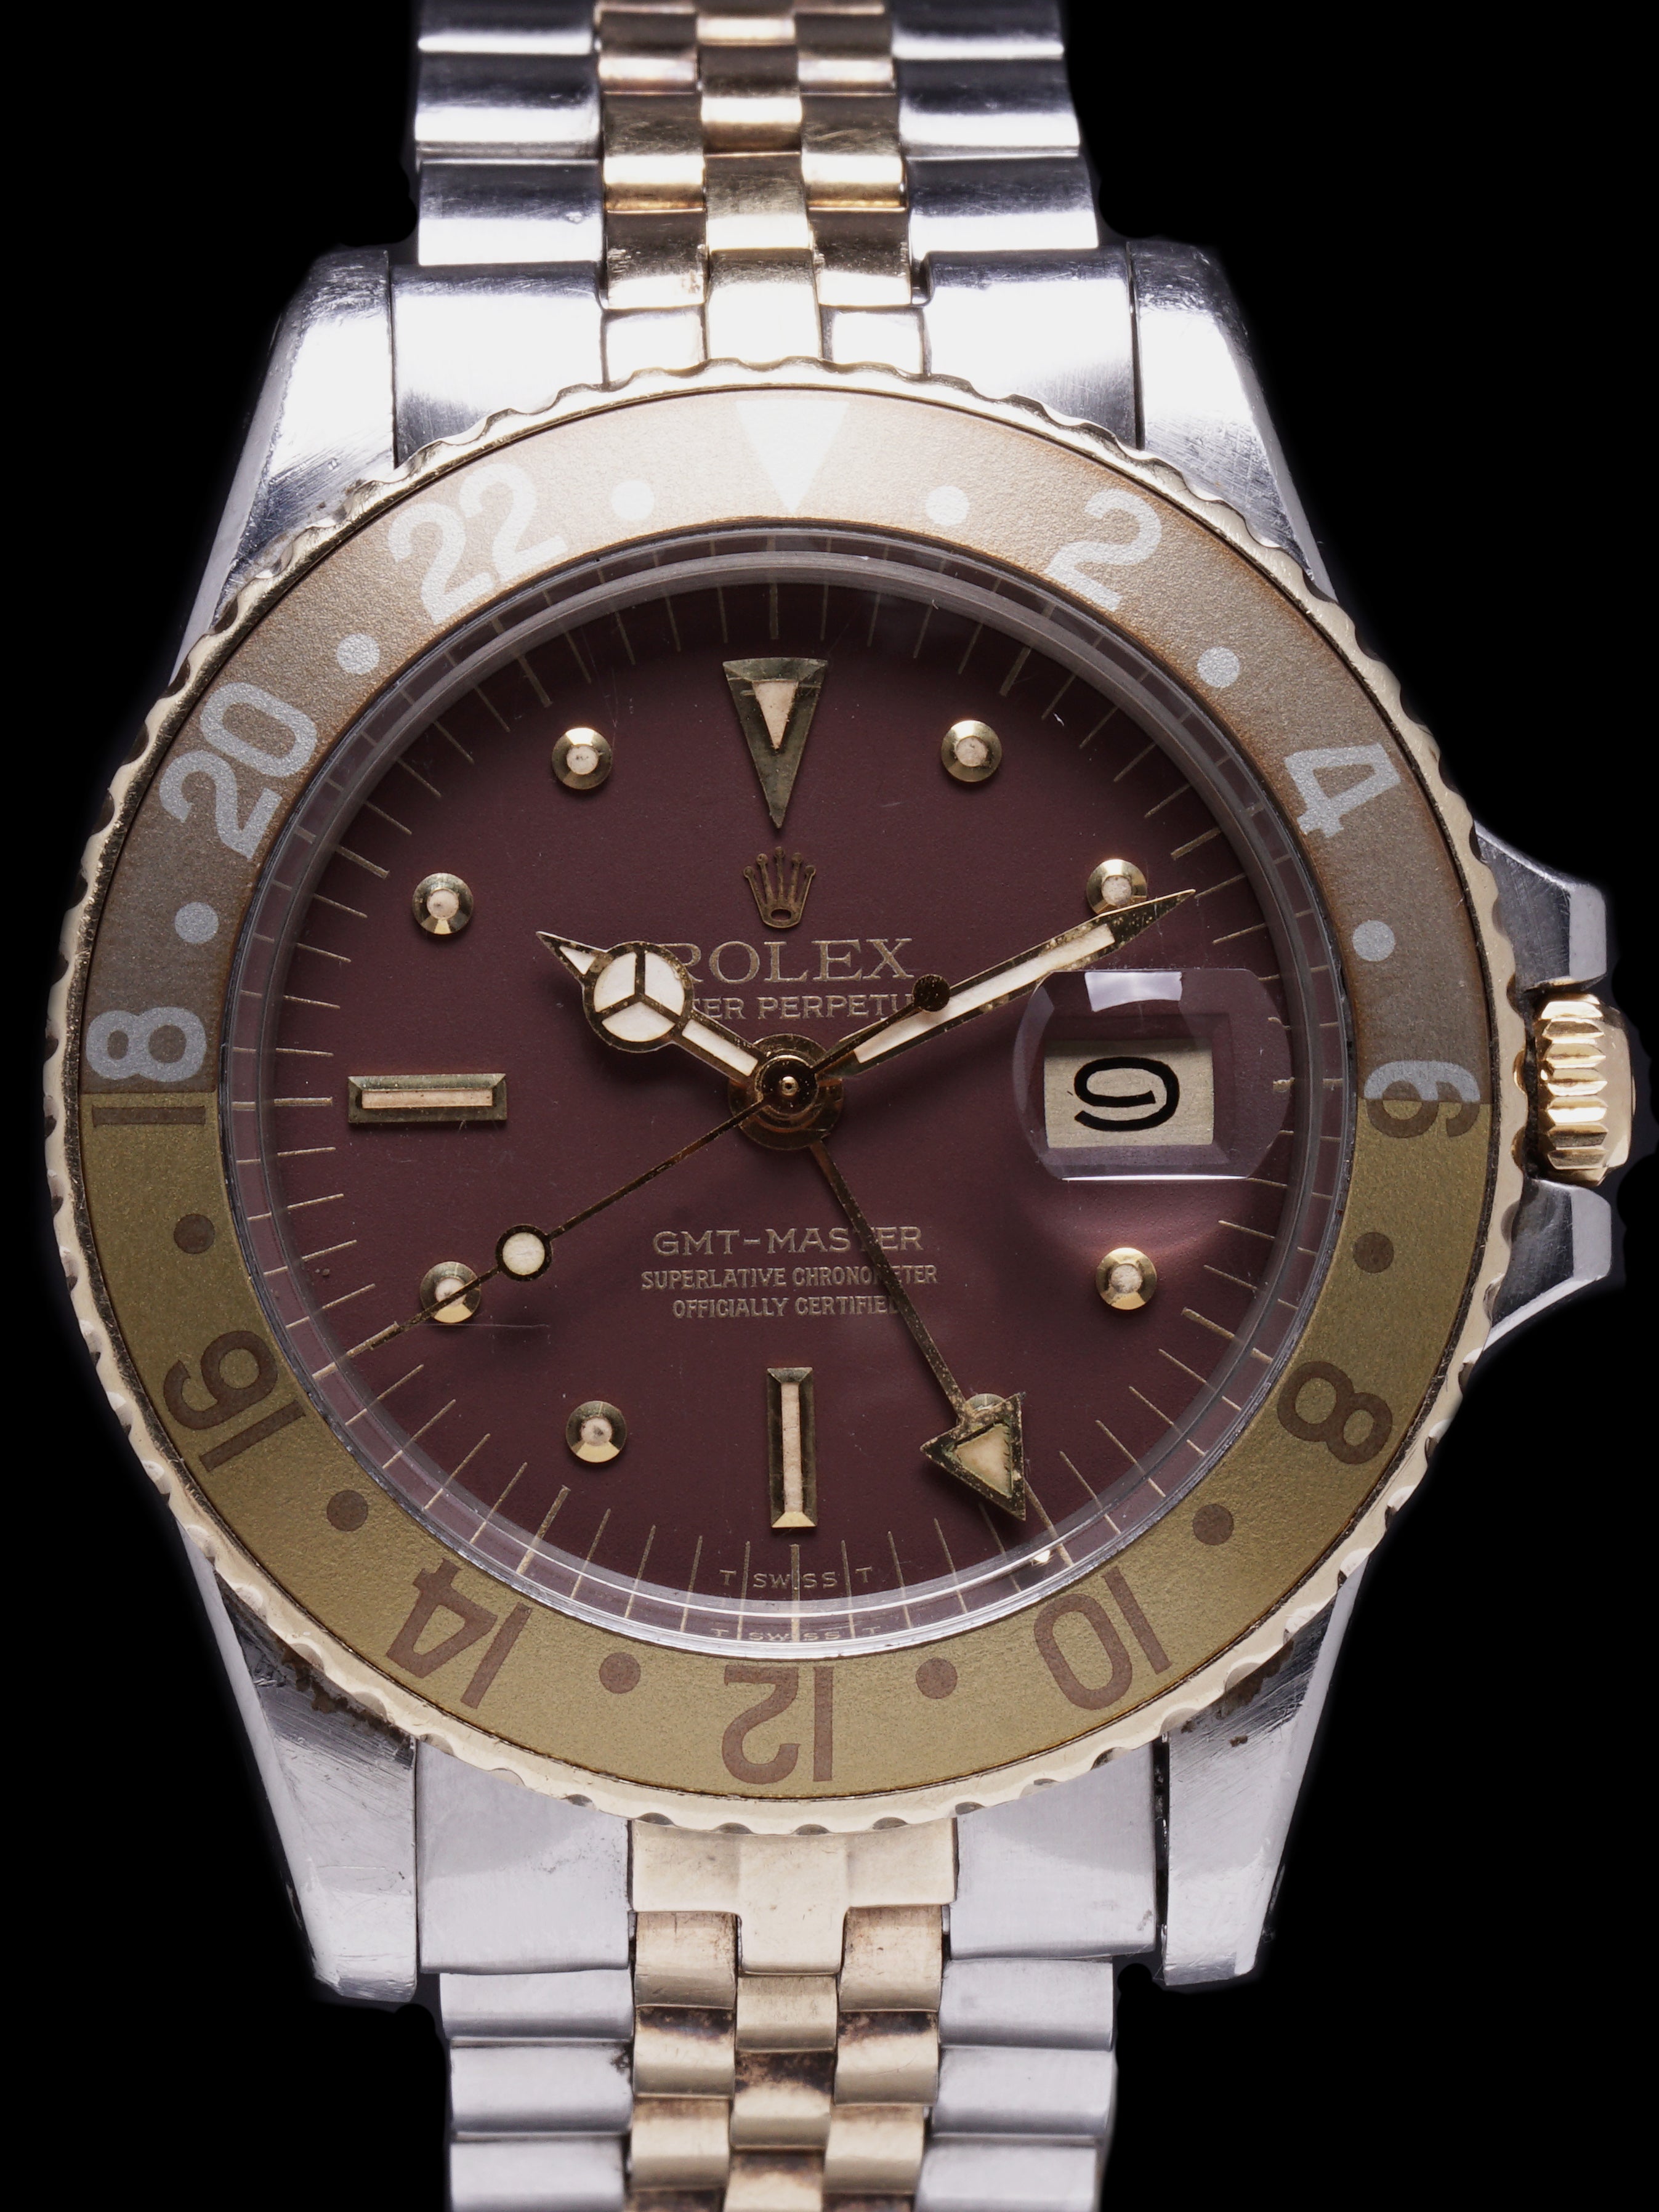 1972 Rolex Two-Tone GMT-Master (Ref. 1675) "Rootbeer"